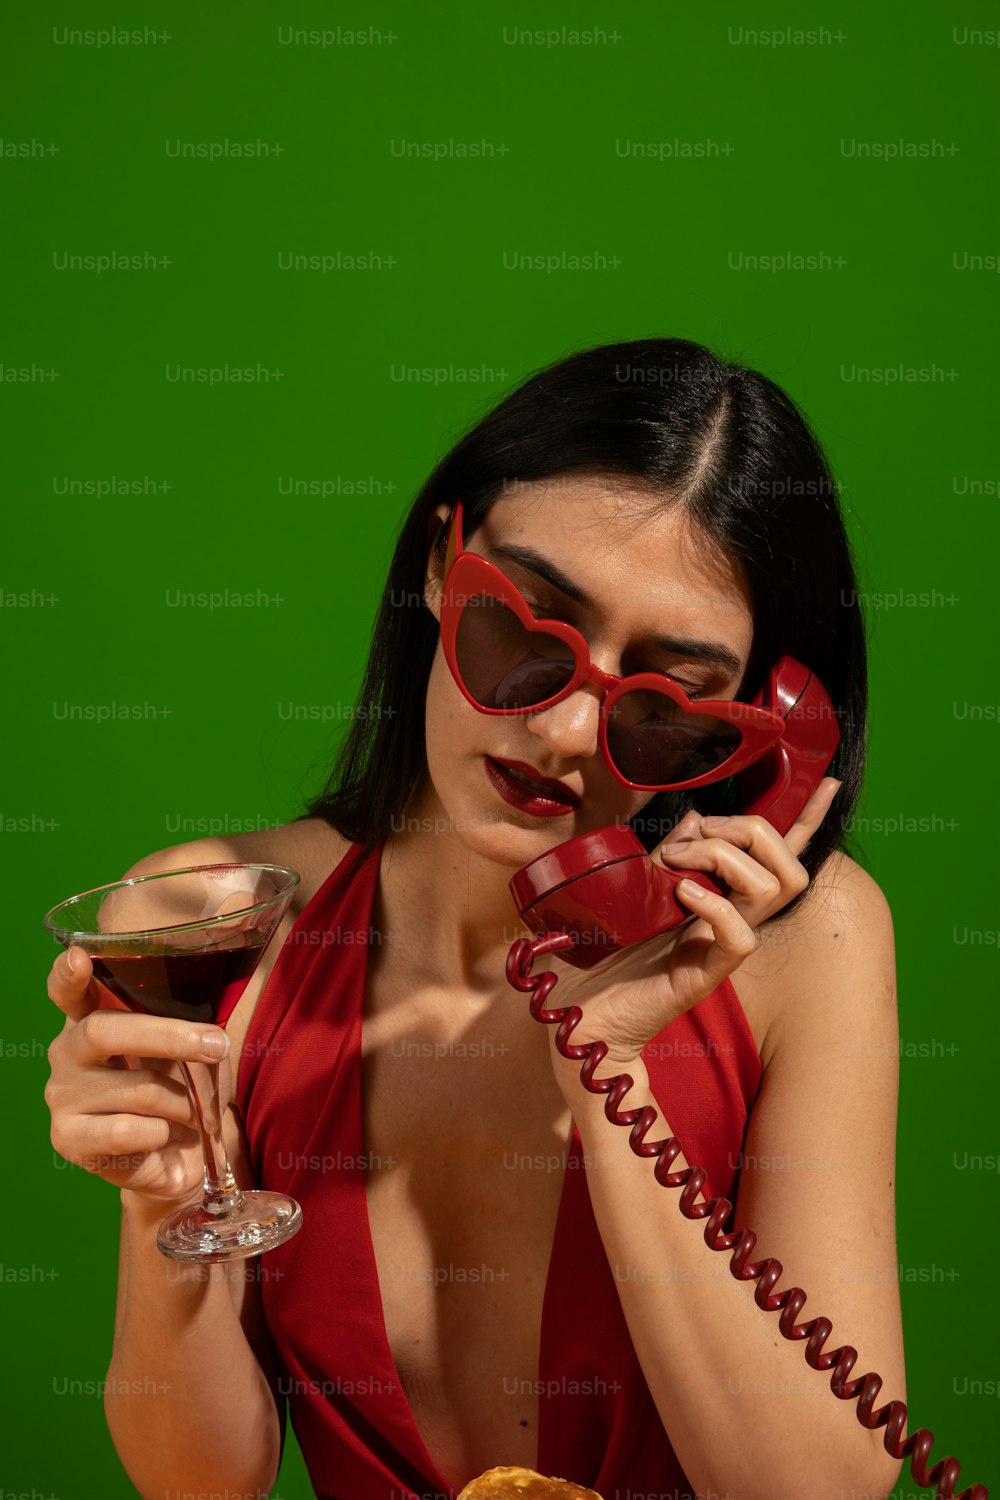 a woman in a red dress holding a glass of wine and talking on the phone